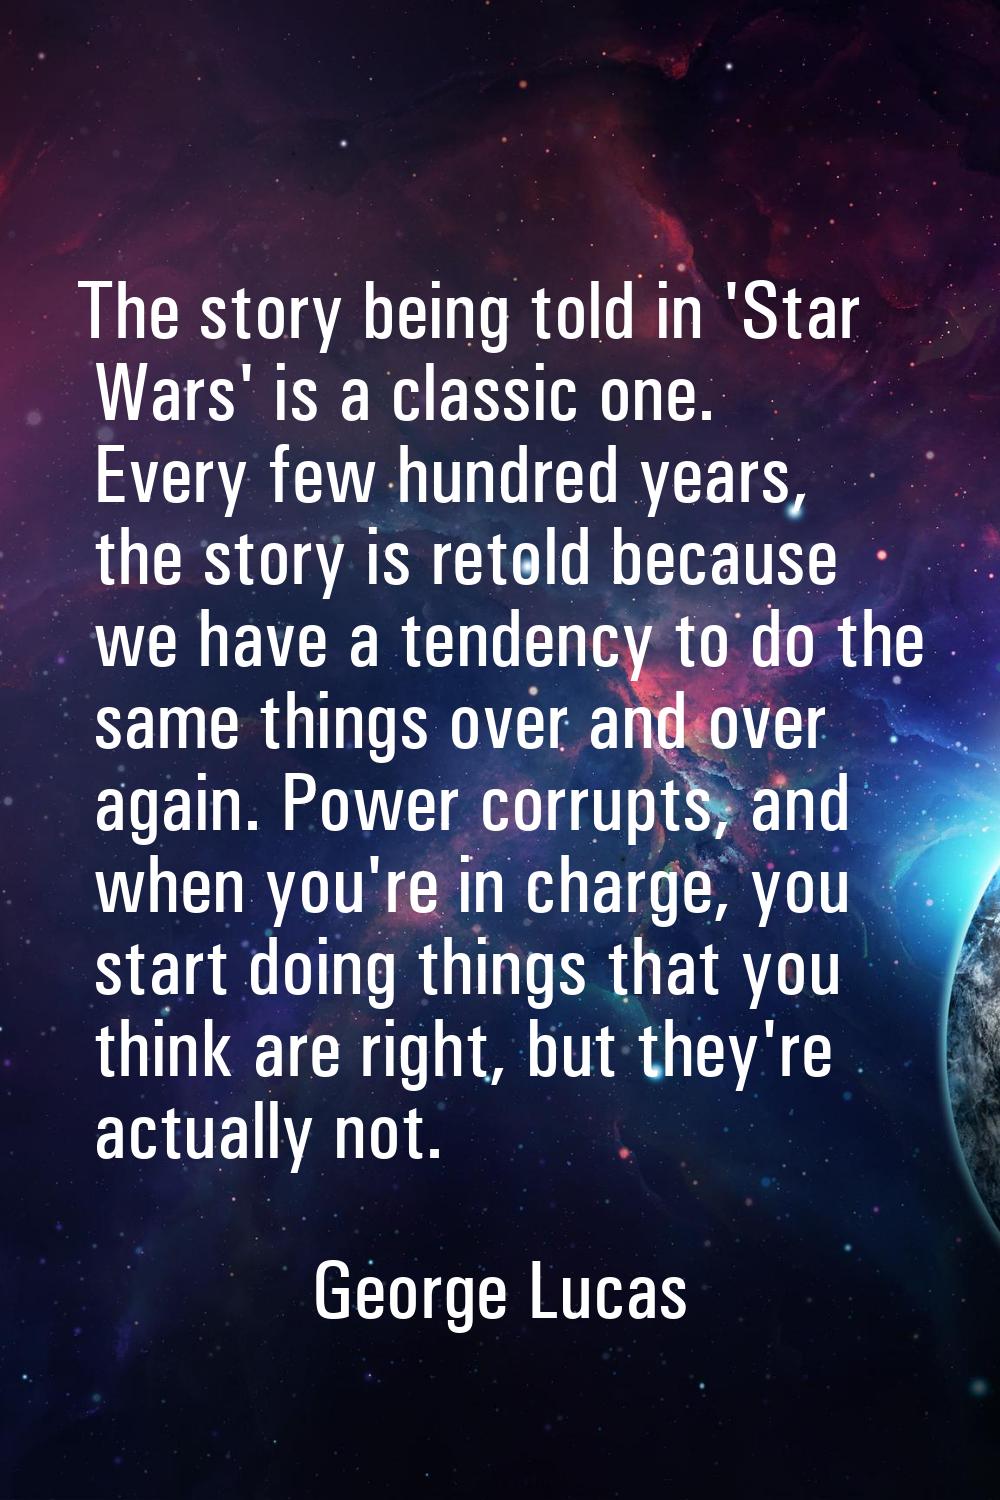 The story being told in 'Star Wars' is a classic one. Every few hundred years, the story is retold 